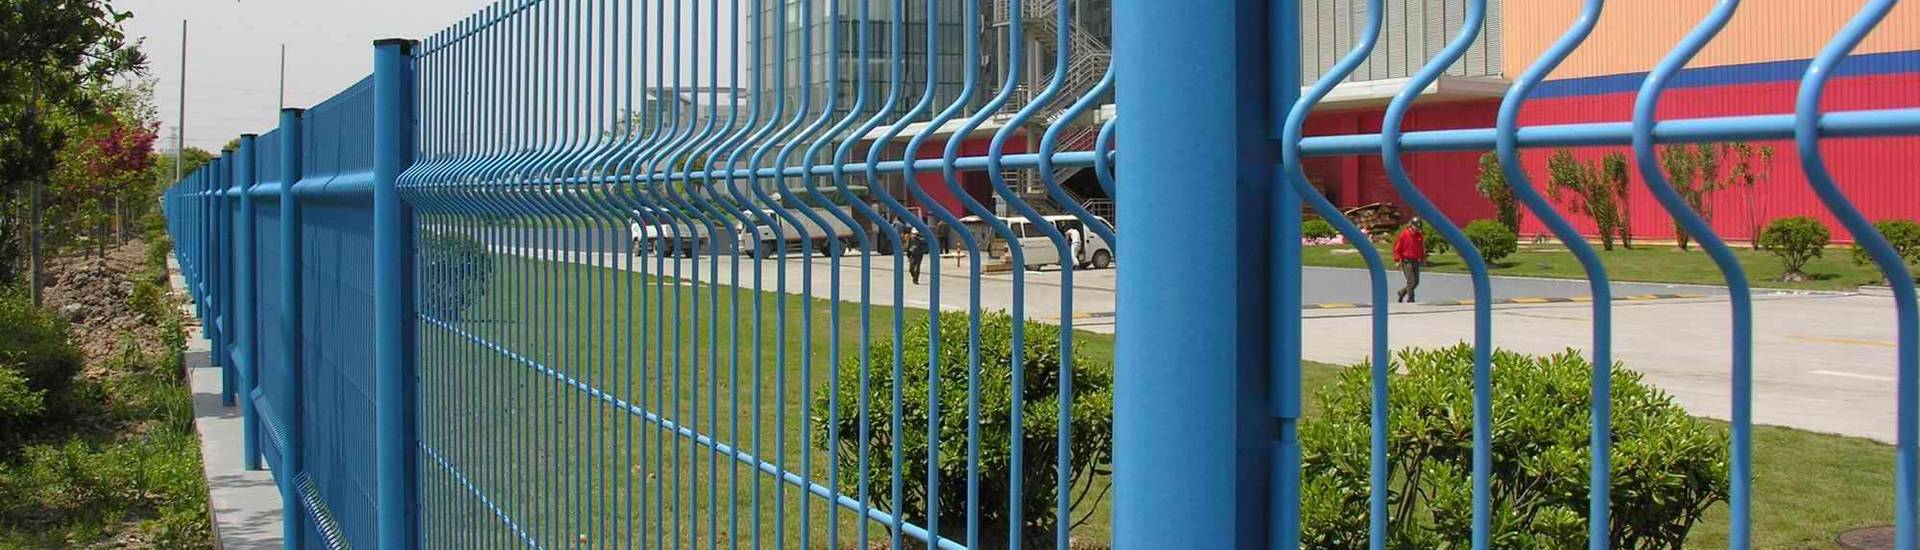 Commonly used double wire fence mesh size introduction